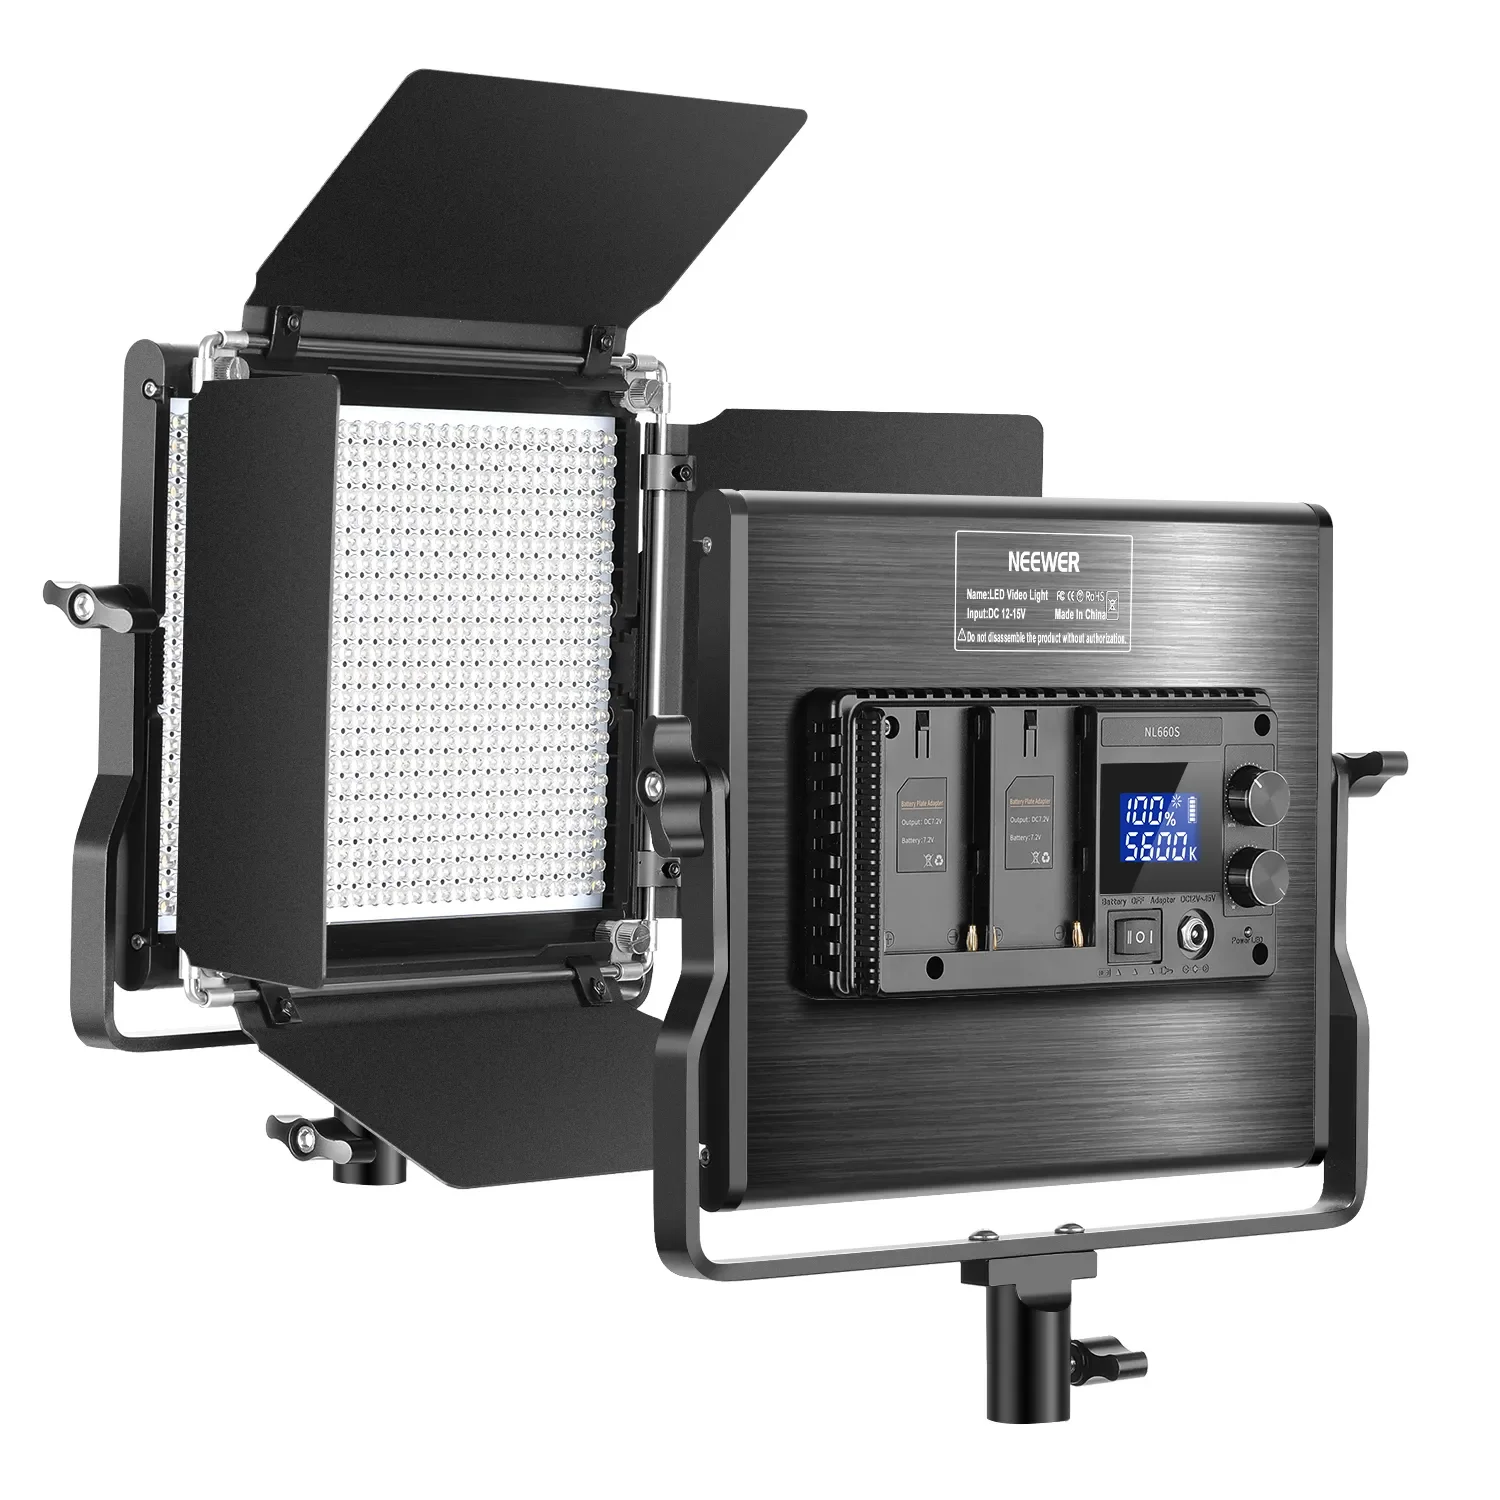 

Neewer Upgraded 660 LED Video Light Dimmable Bi-Color LED Panel With LCD Screen For Studio, YouTube Video Shooting Photography